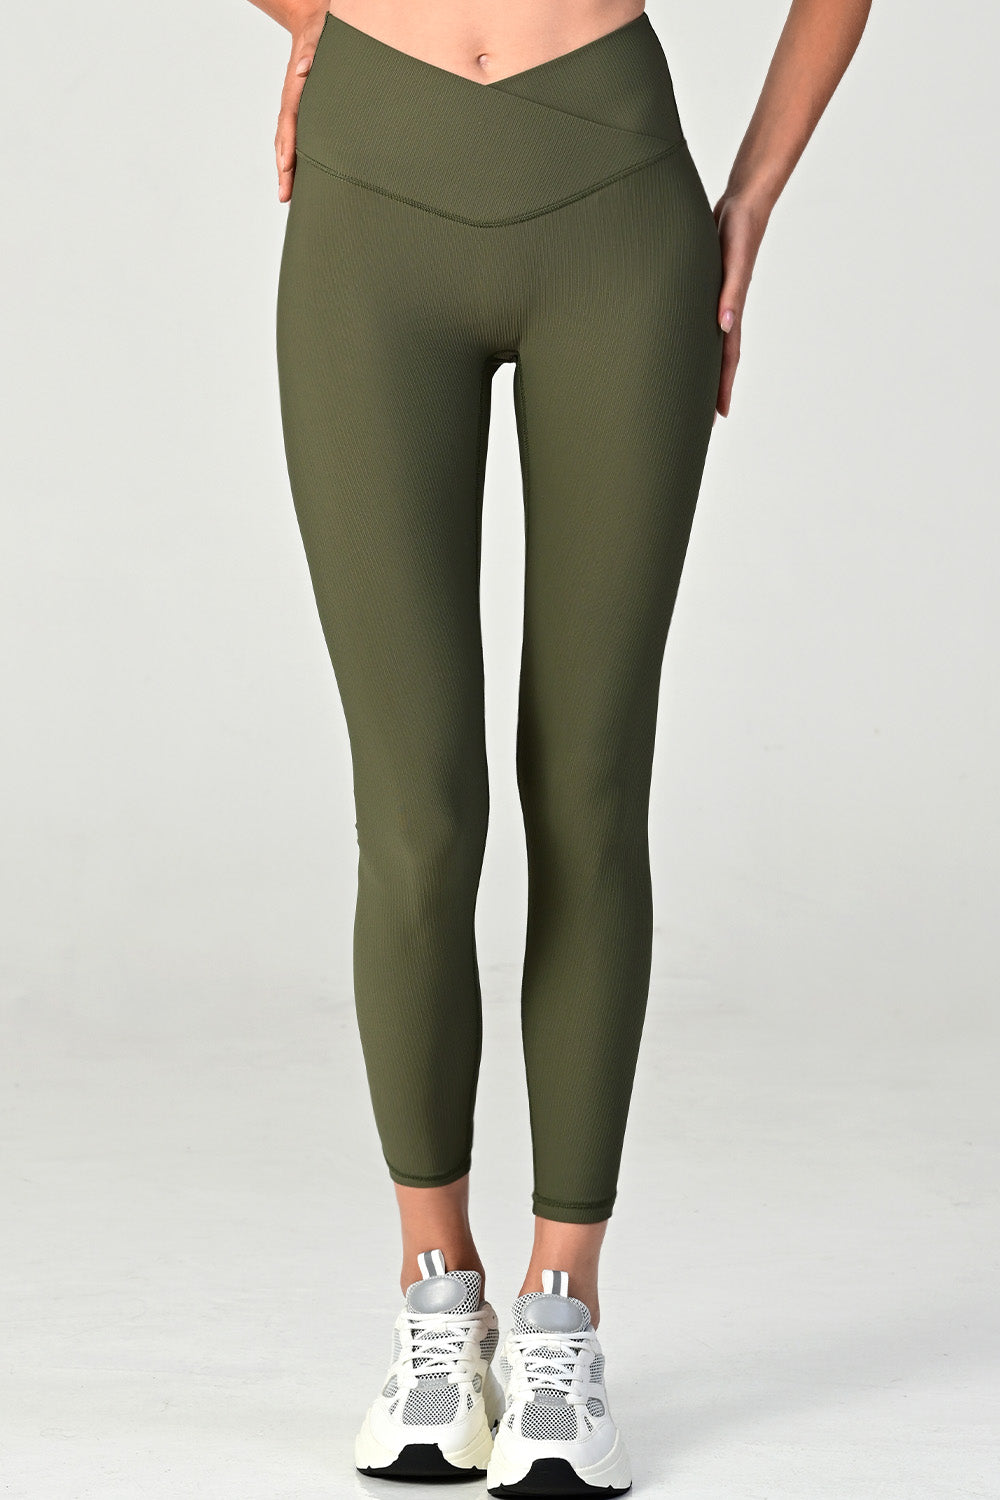 Woman wearing the Melrose army ribbed leggings close up front view.